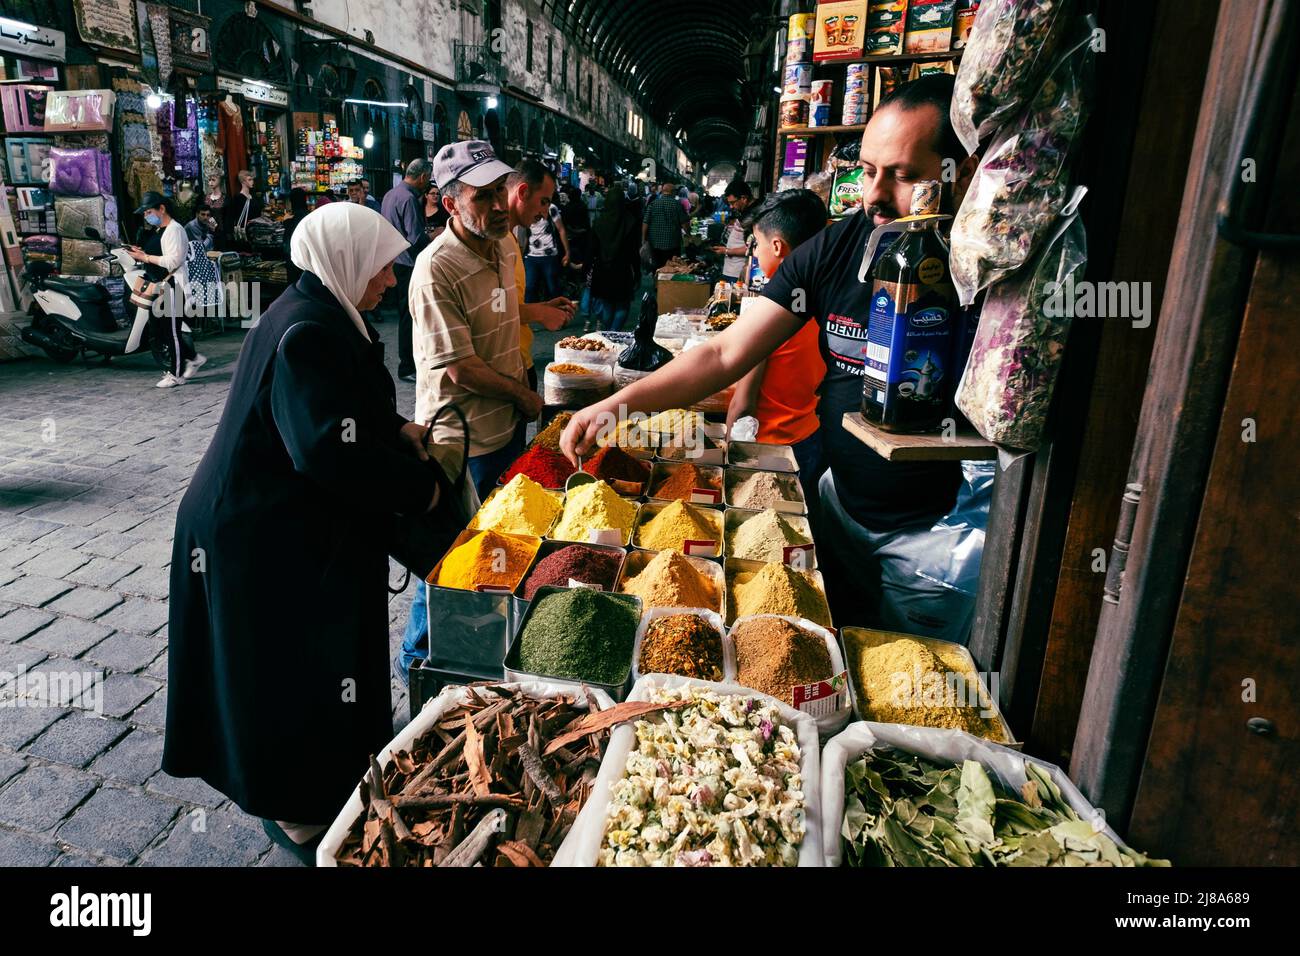 Damascus, Syria -May, 2022: Older Couple buying food, herbals and spices at Suq Al Hamidiyah street market in Damascus Stock Photo